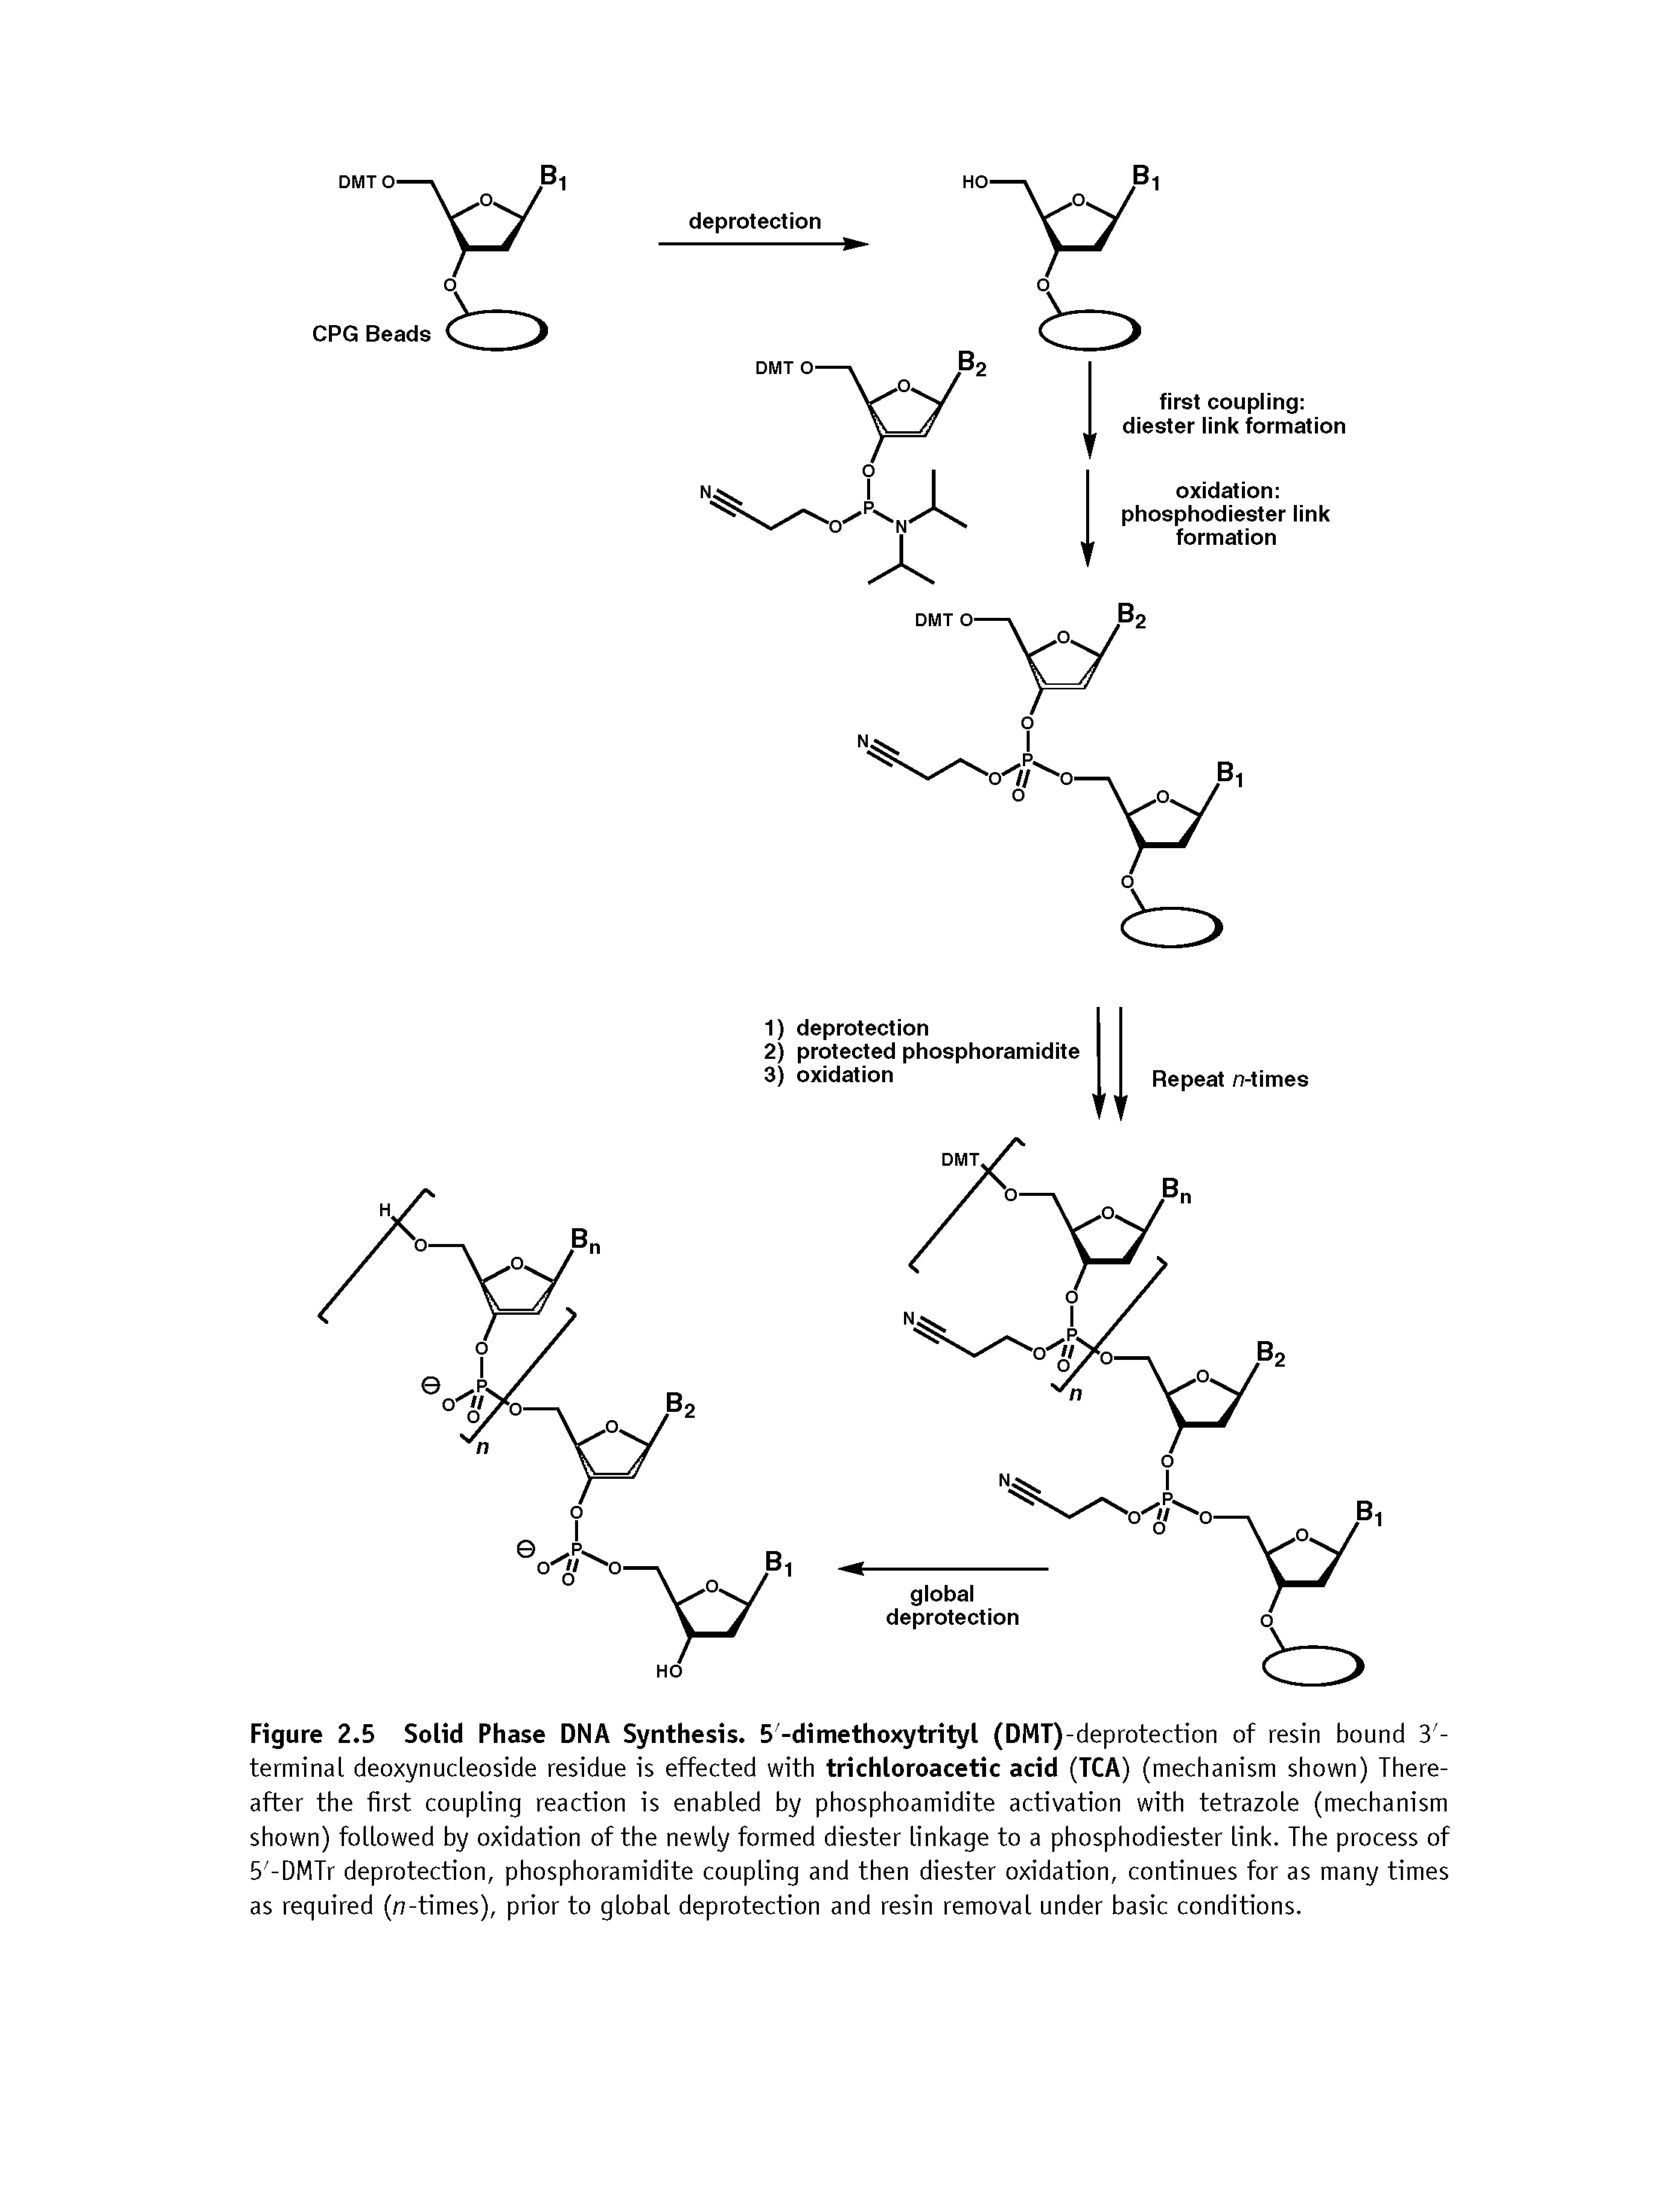 Figure 2.5 Solid Phase DNA Synthesis. 5 -dimethoxytrityl (DMT)-deprotection of resin bound 3 -terminal deoxynucLeoside residue is effected with trichloroacetic acid (TCA) (mechanism shown) Thereafter the first coupling reaction is enabled by phosphoamidite activation with tetrazole (mechanism shown) followed by oxidation of the newly formed diester linkage to a phosphodiester link. The process of 5 -DMTr deprotection, phosphoramidite coupling and then diester oxidation, continues for as many times as required (n-times), prior to global deprotection and resin removal under basic conditions.